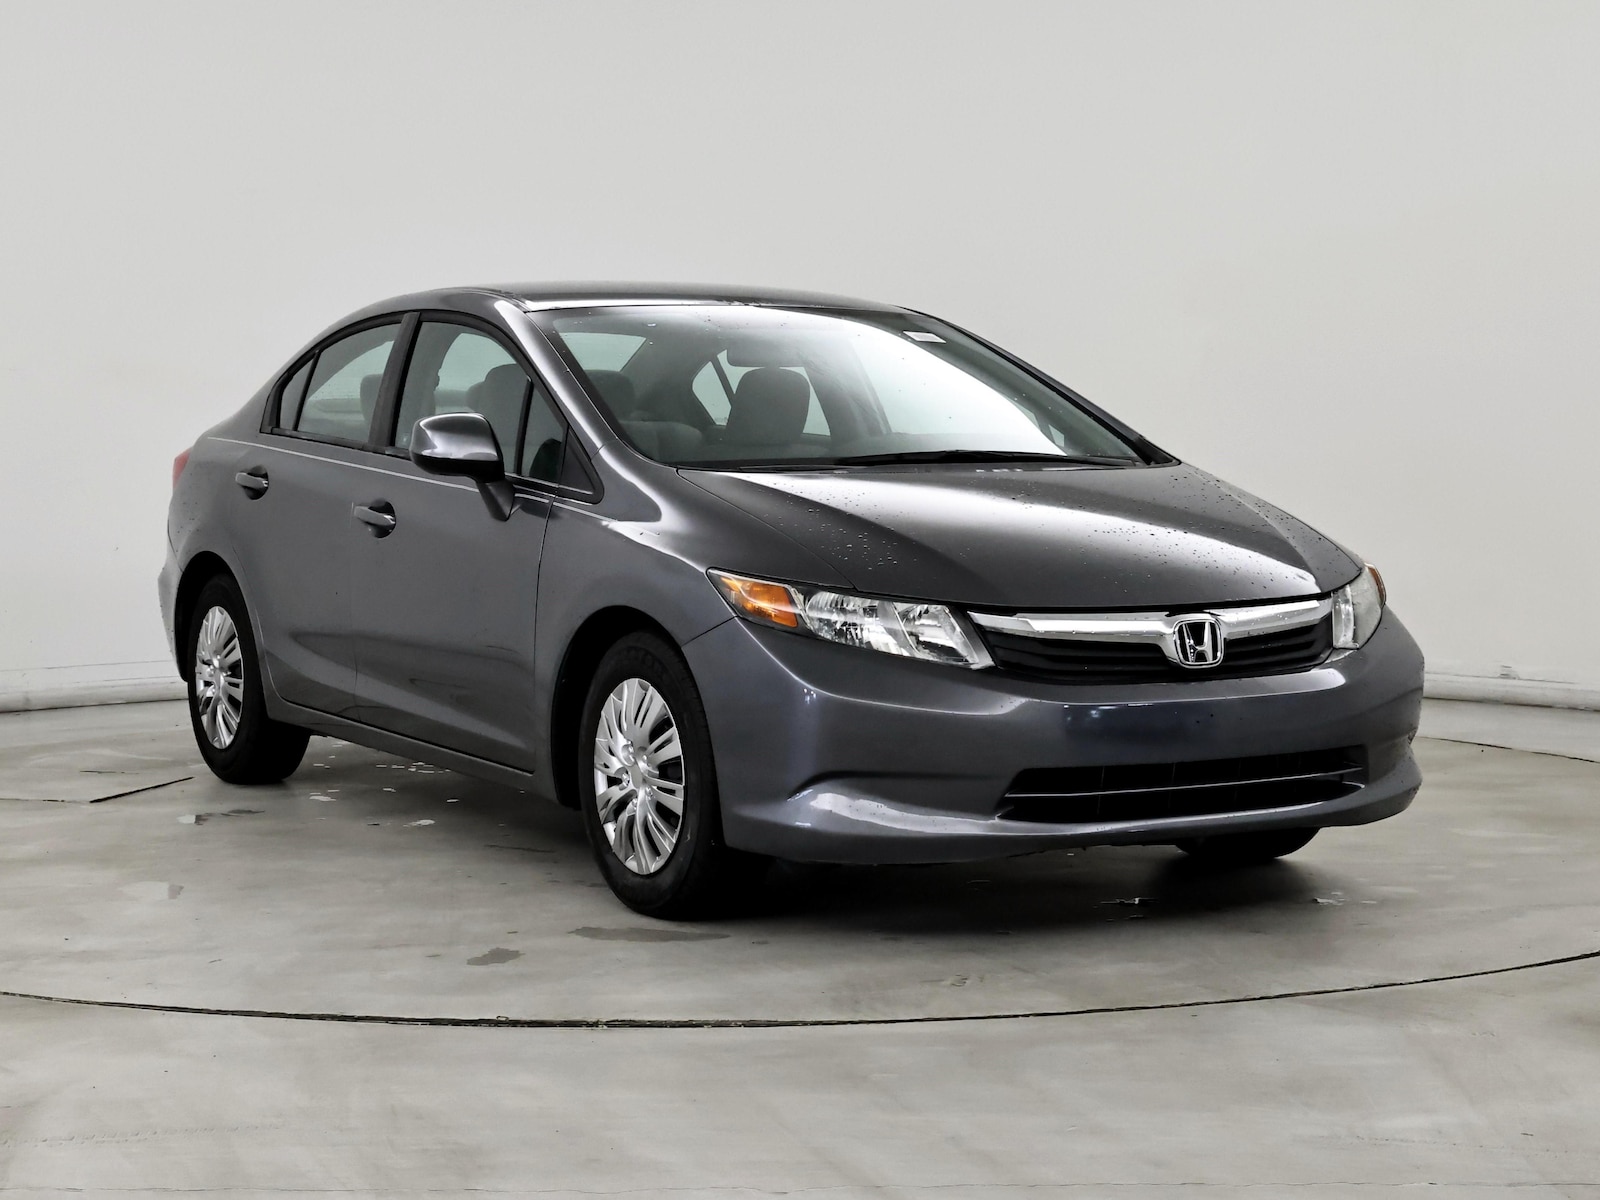 Used 2012 Honda Civic LX with VIN 19XFB2F50CE358276 for sale in Kenosha, WI